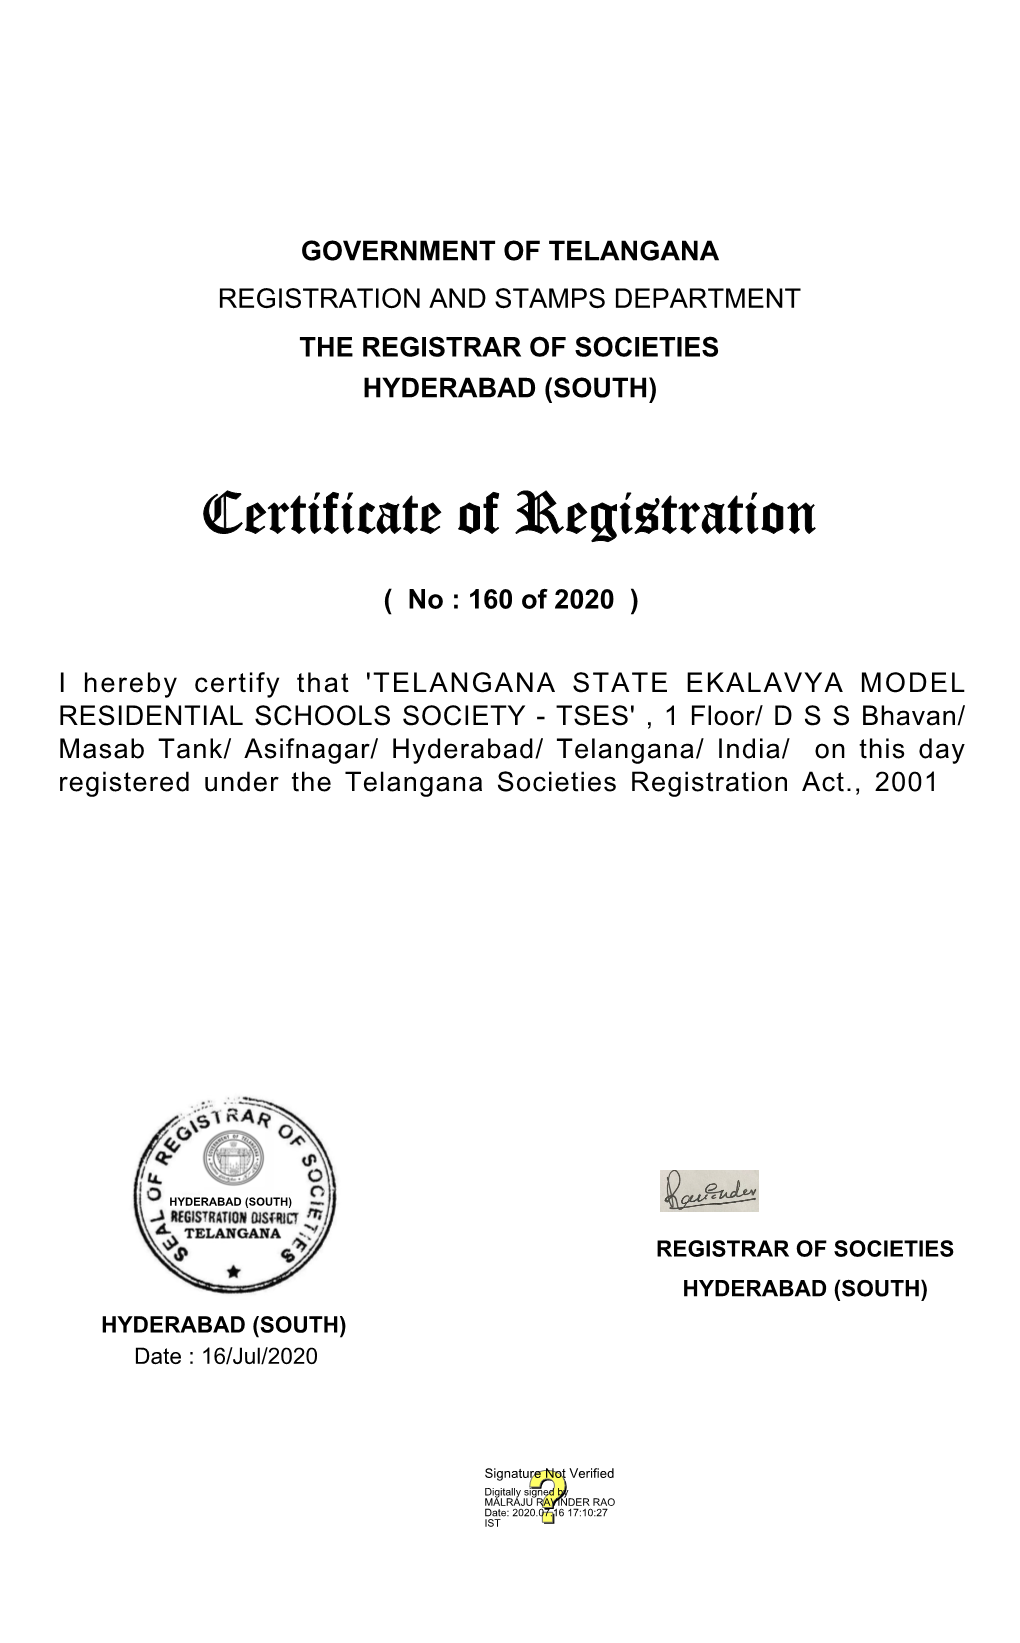 Hyderabad/ Telangana/ India/ on This Day Registered Under the Telangana Societies Registration Act., 2001